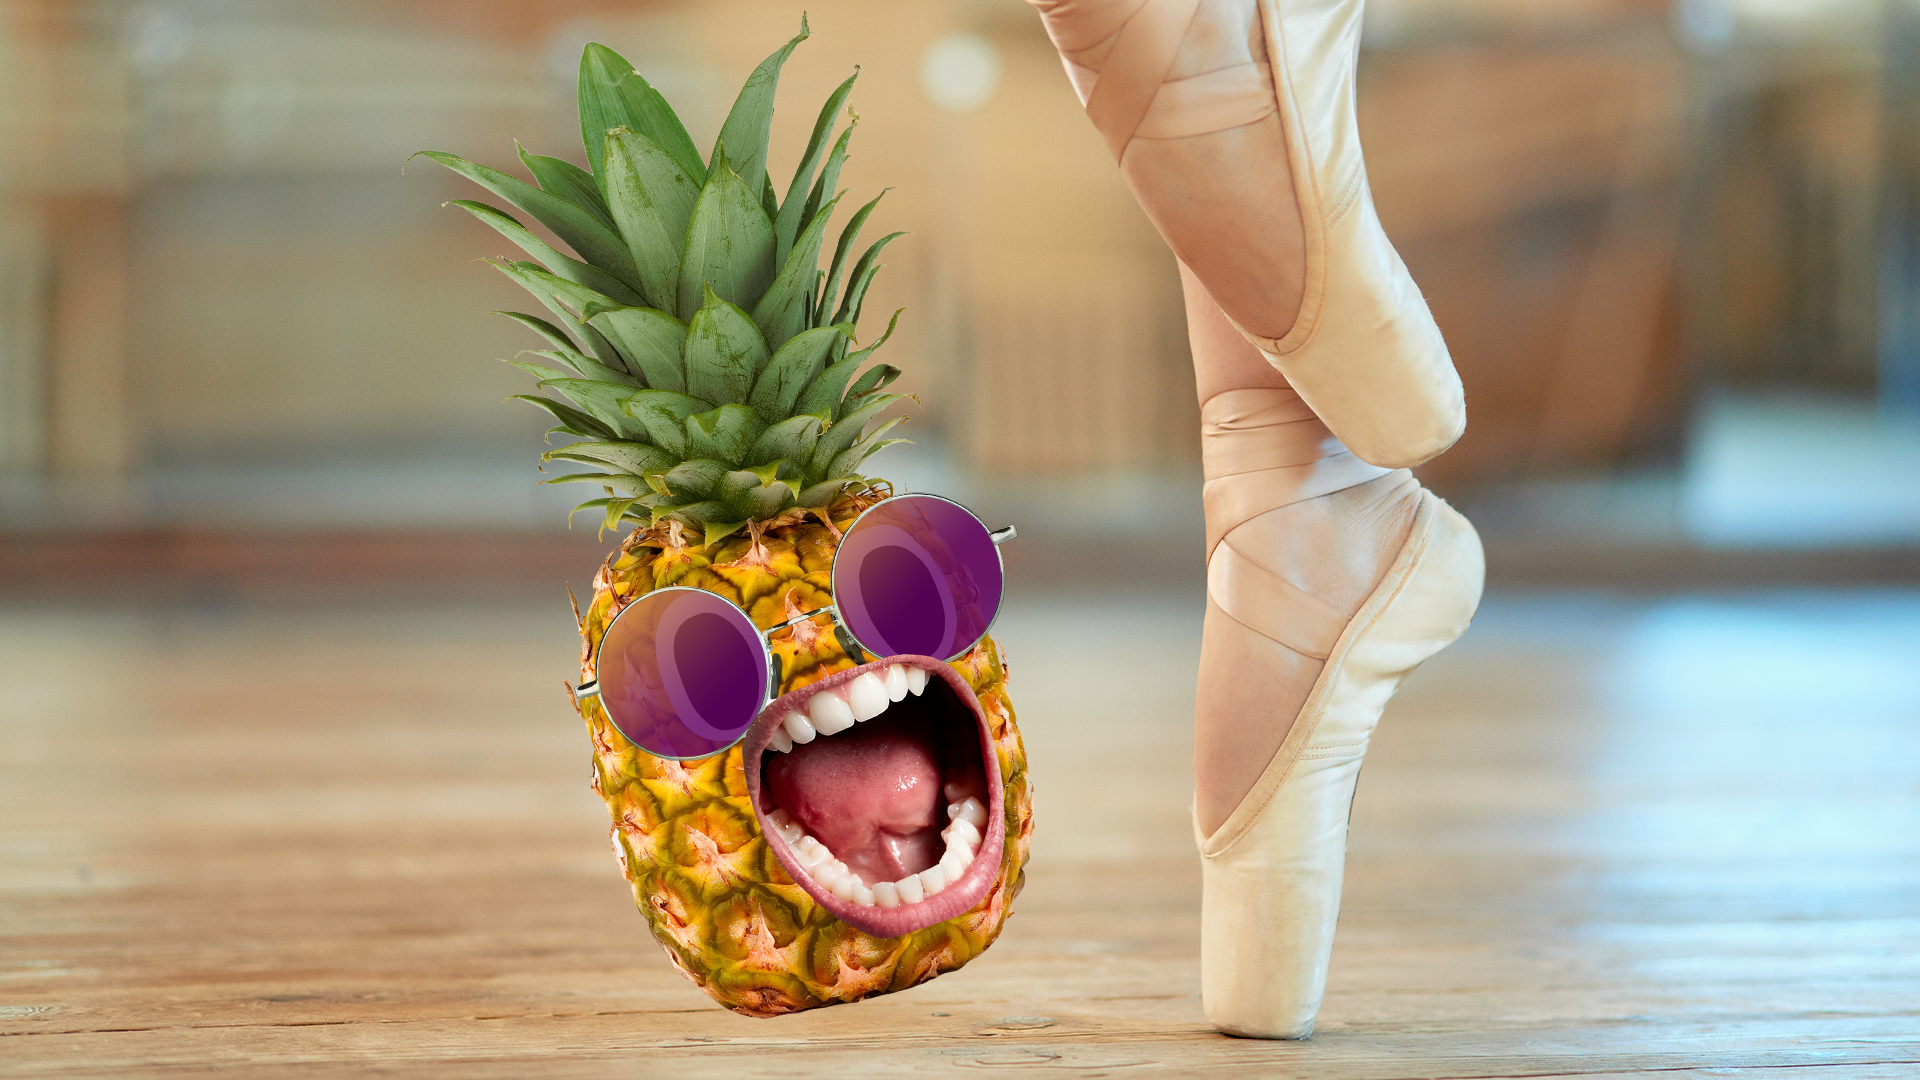 Ballet shoes with added pineapple